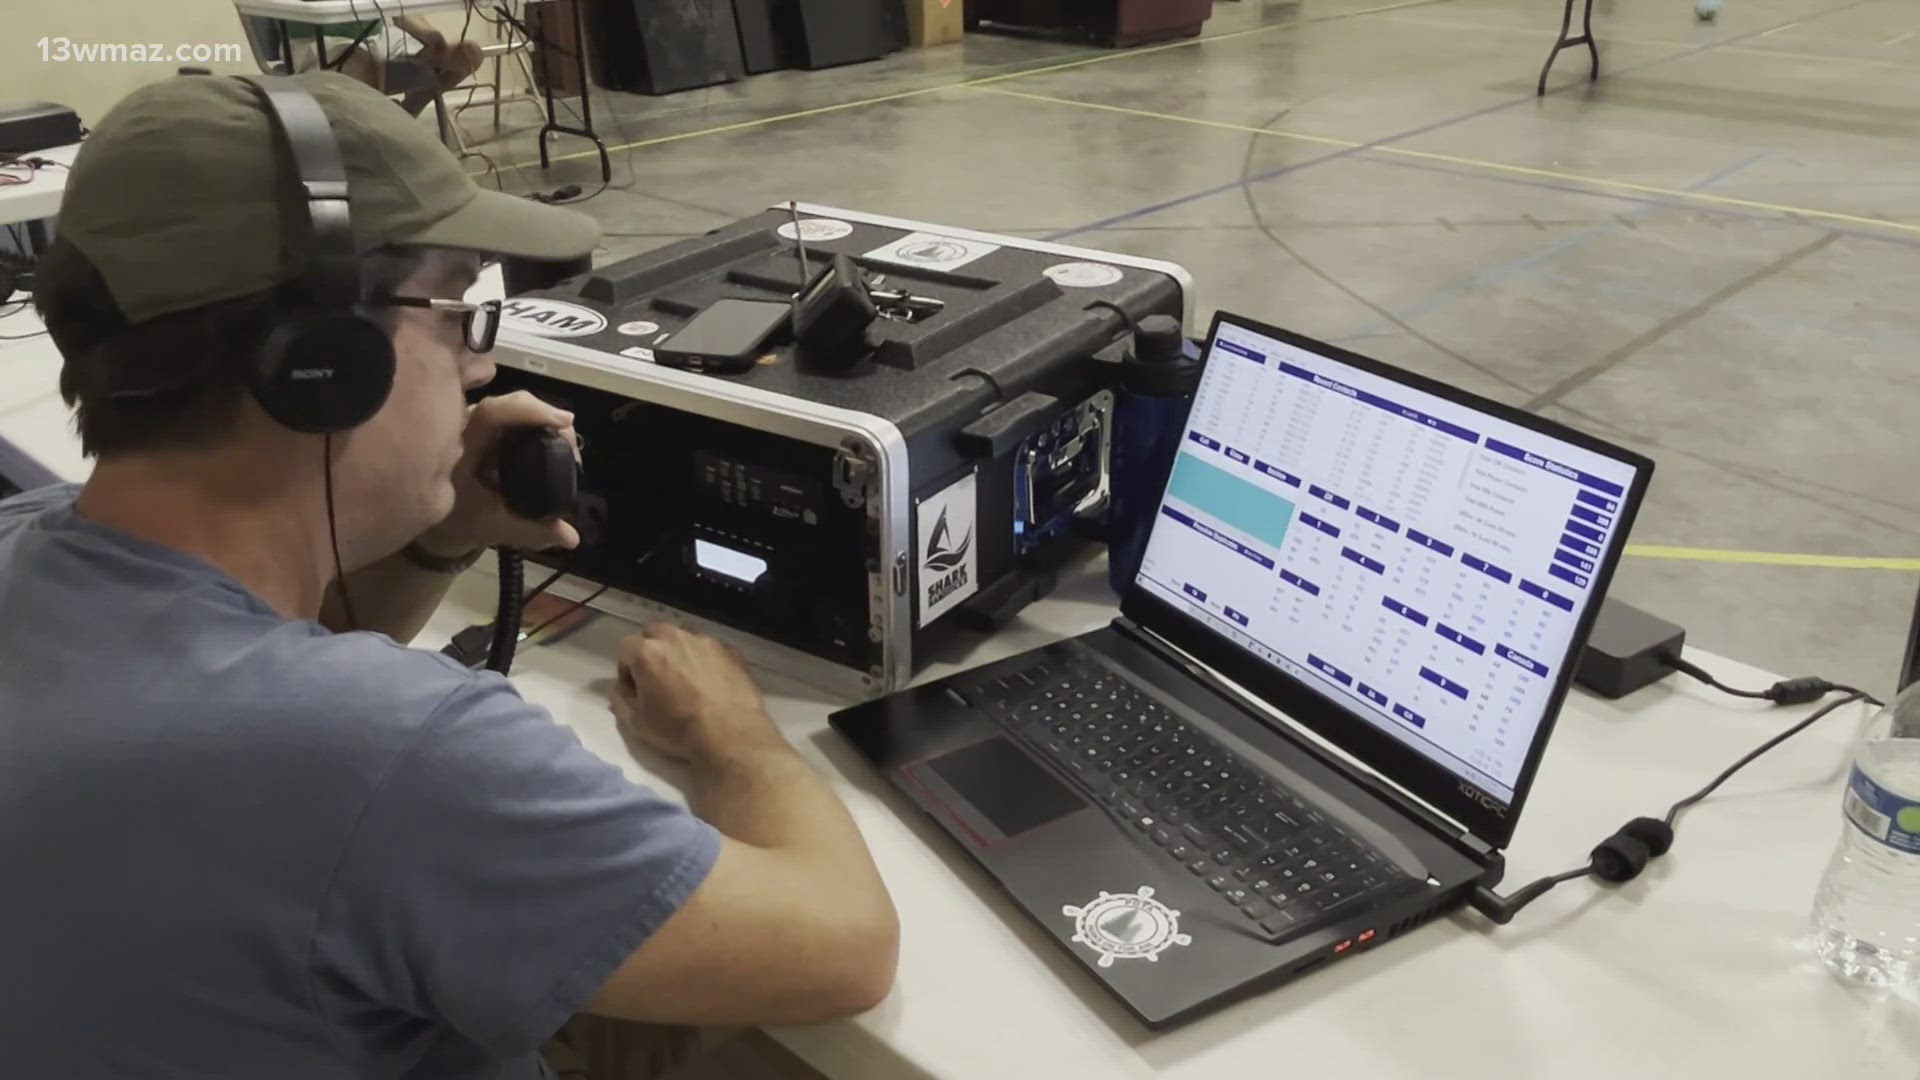 Here's a look at the event and why participants think HAM radio is important